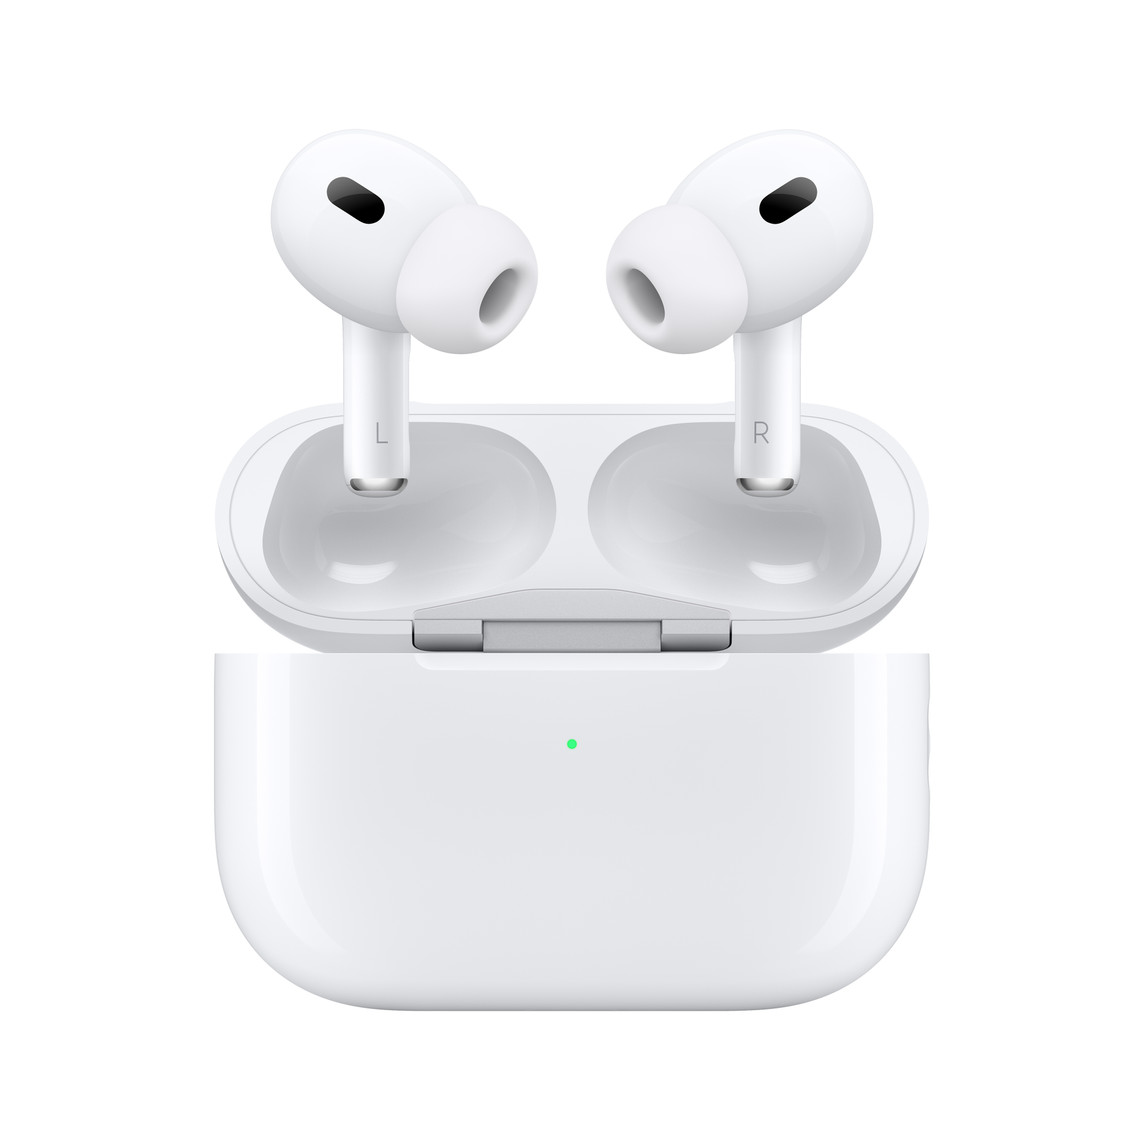 How to Set Up Sleep Timers on AirPods? 1